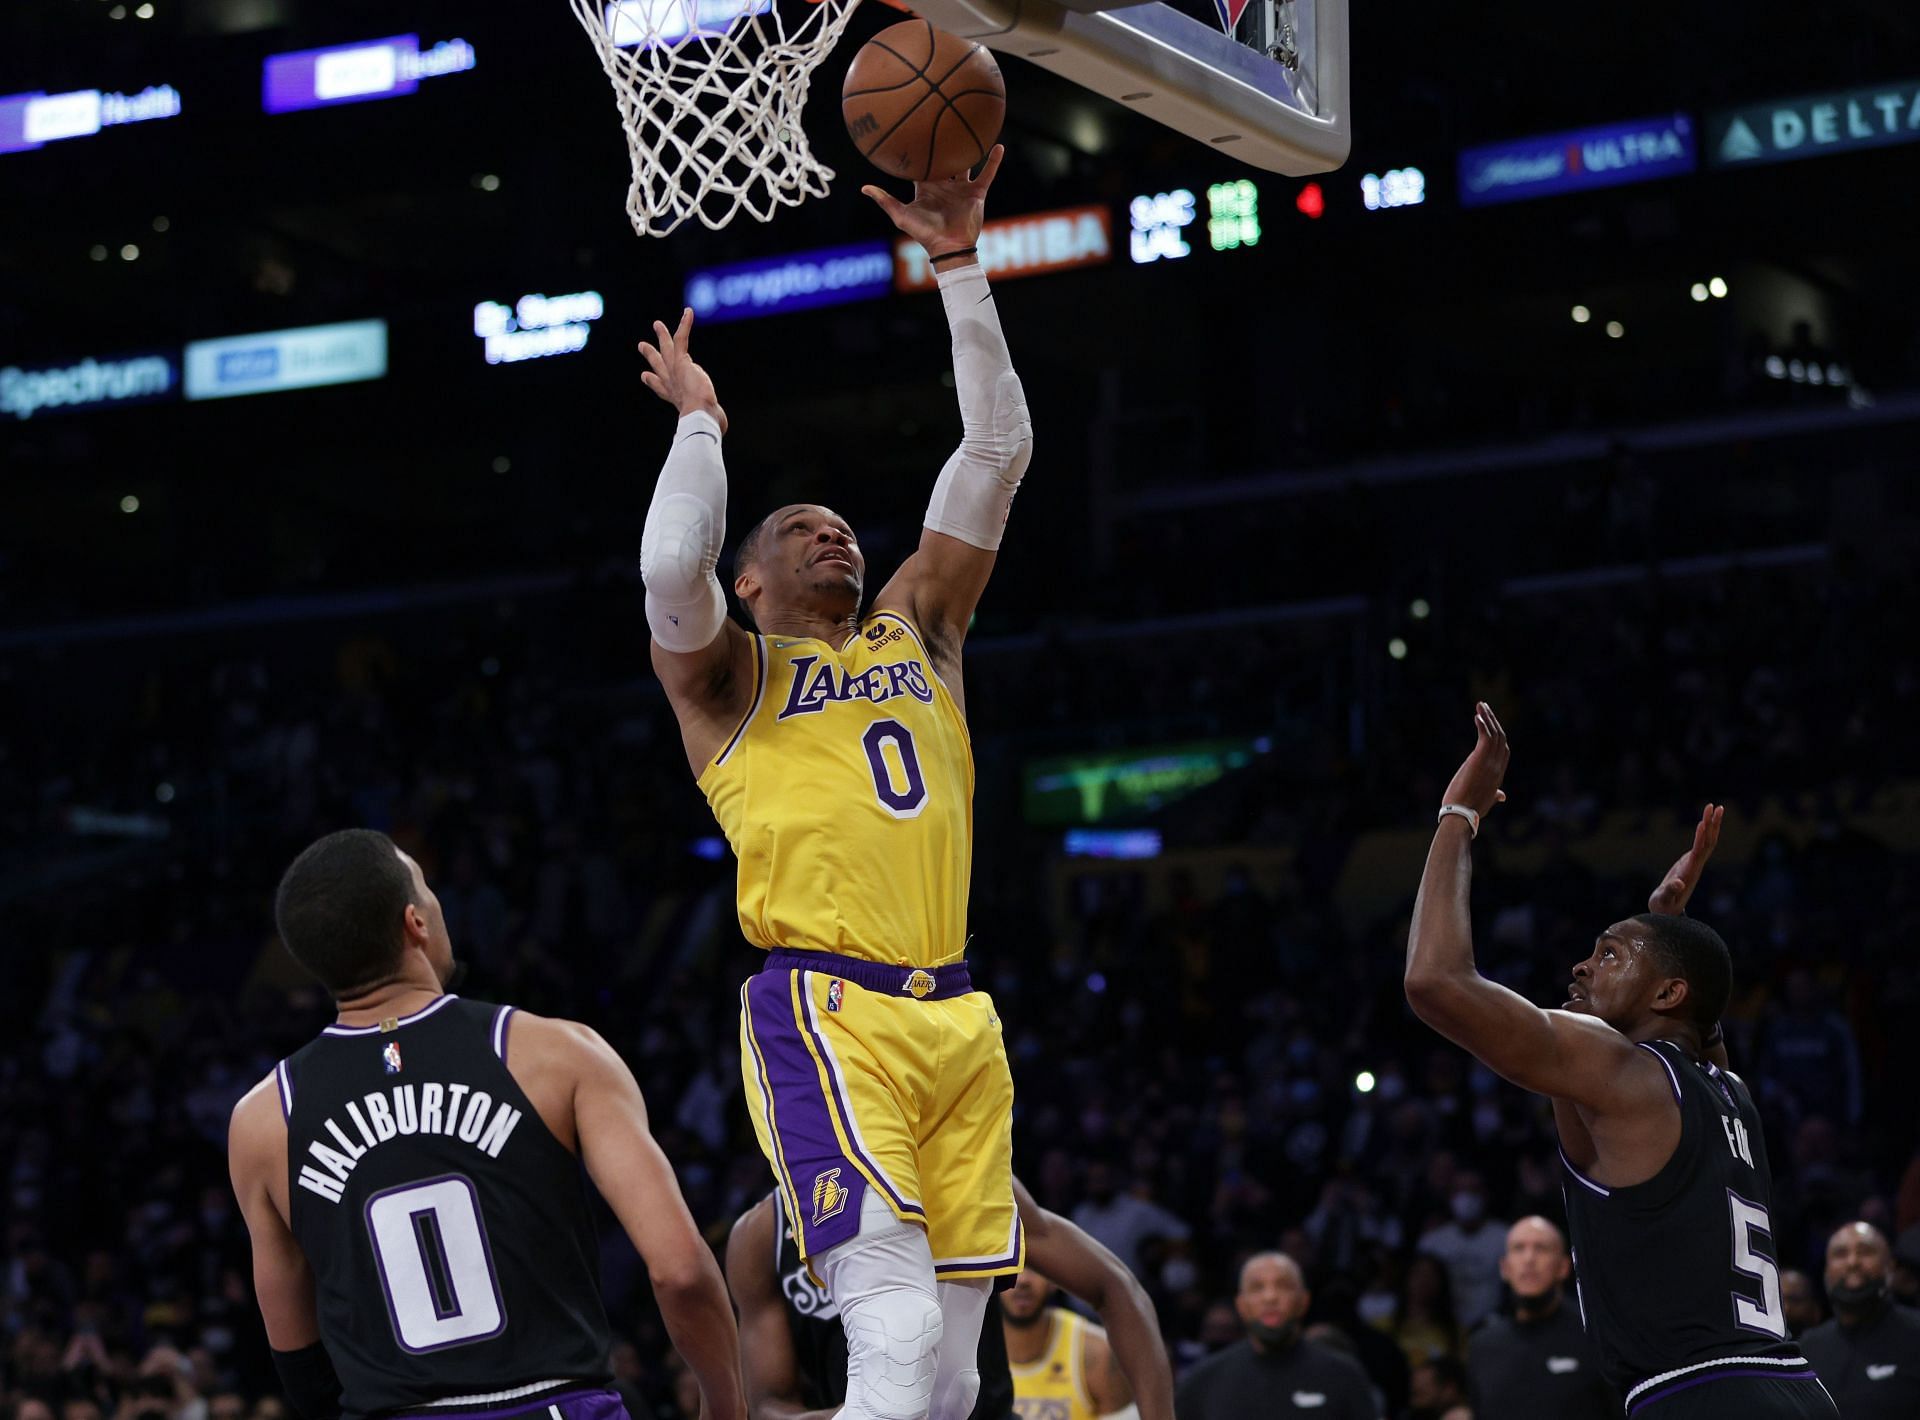 Russell Westbrook of the LA Lakers scores on a layup between Tyrese Haliburton and De&#039;Aaron Fox of the Sacramento Kings during a 122-114 Los Angeles Lakers&#039; win on Jan. 4 in Los Angeles, California.